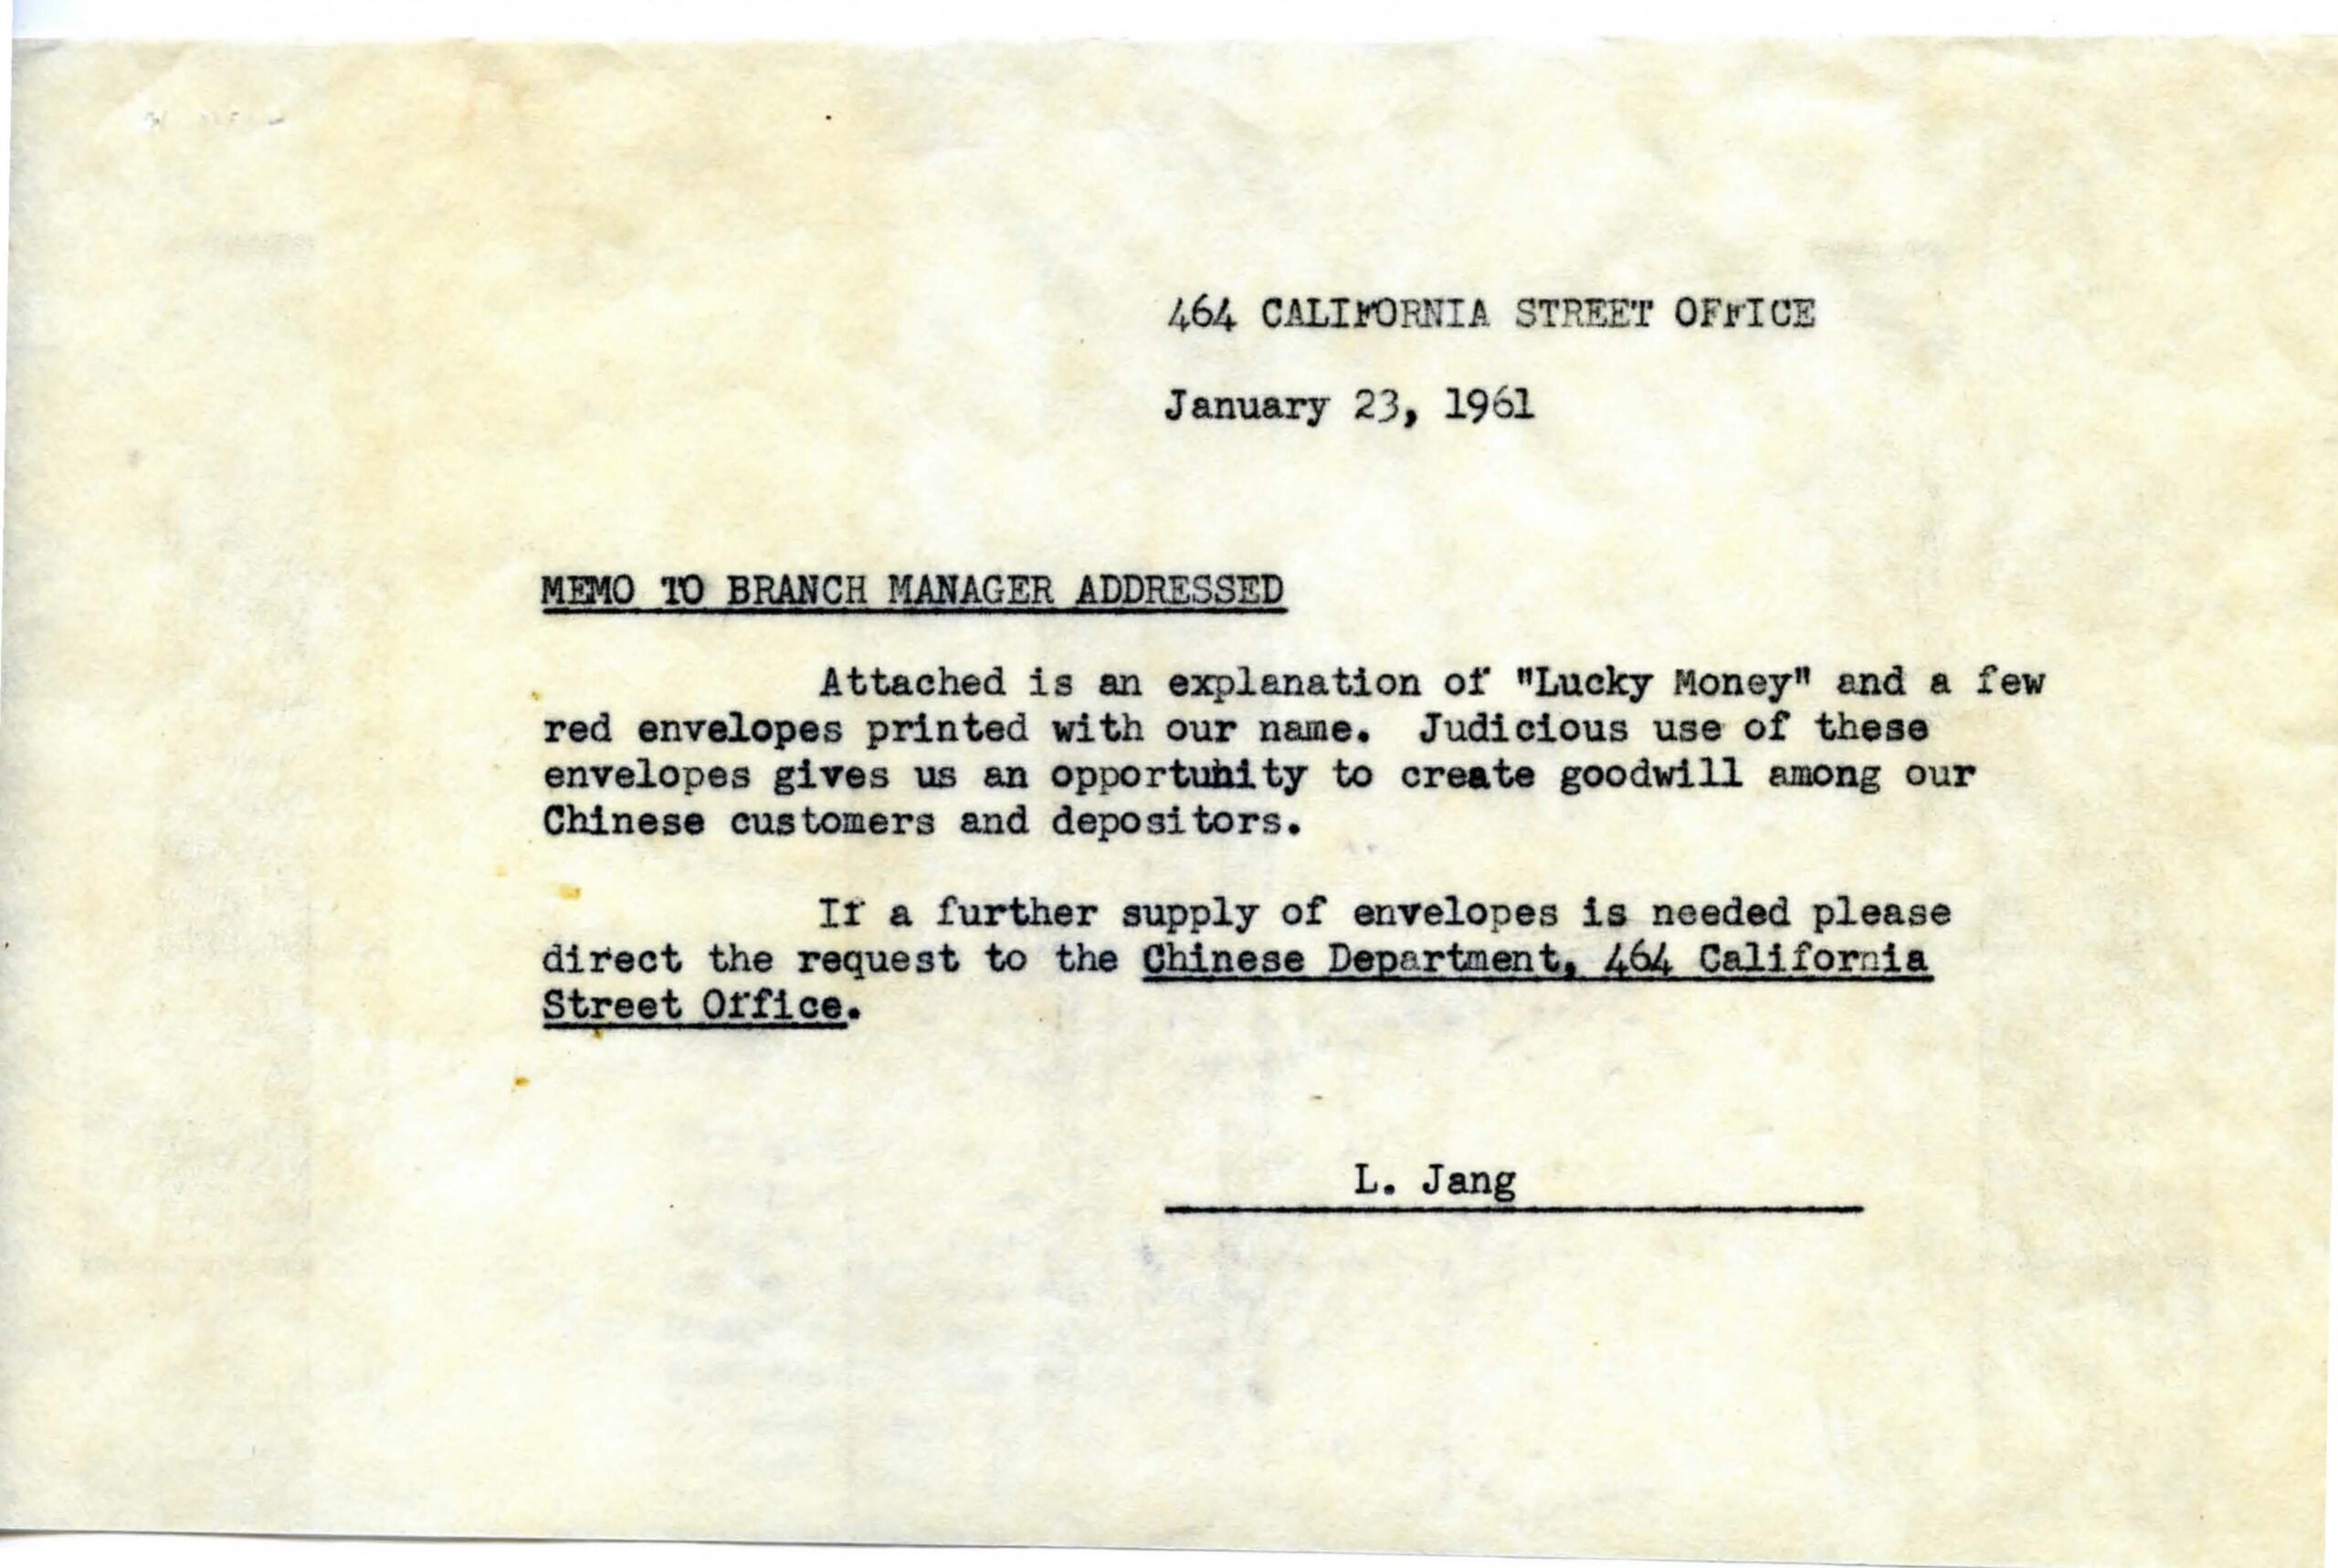 A yellow paper with a typewritten memo in black ink dated January 21, 1961. It reads: Attached is an explanation of “Lucky Money” and a few red envelopes printed with our name. Judicious use of these envelopes gives us the opportunity to create goodwill among our Chinese customers and depositors. If a further supply of envelopes is needed please direct the request to Chinese Department, 464 California Street Office. L. Jang. Image link will enlarge image.